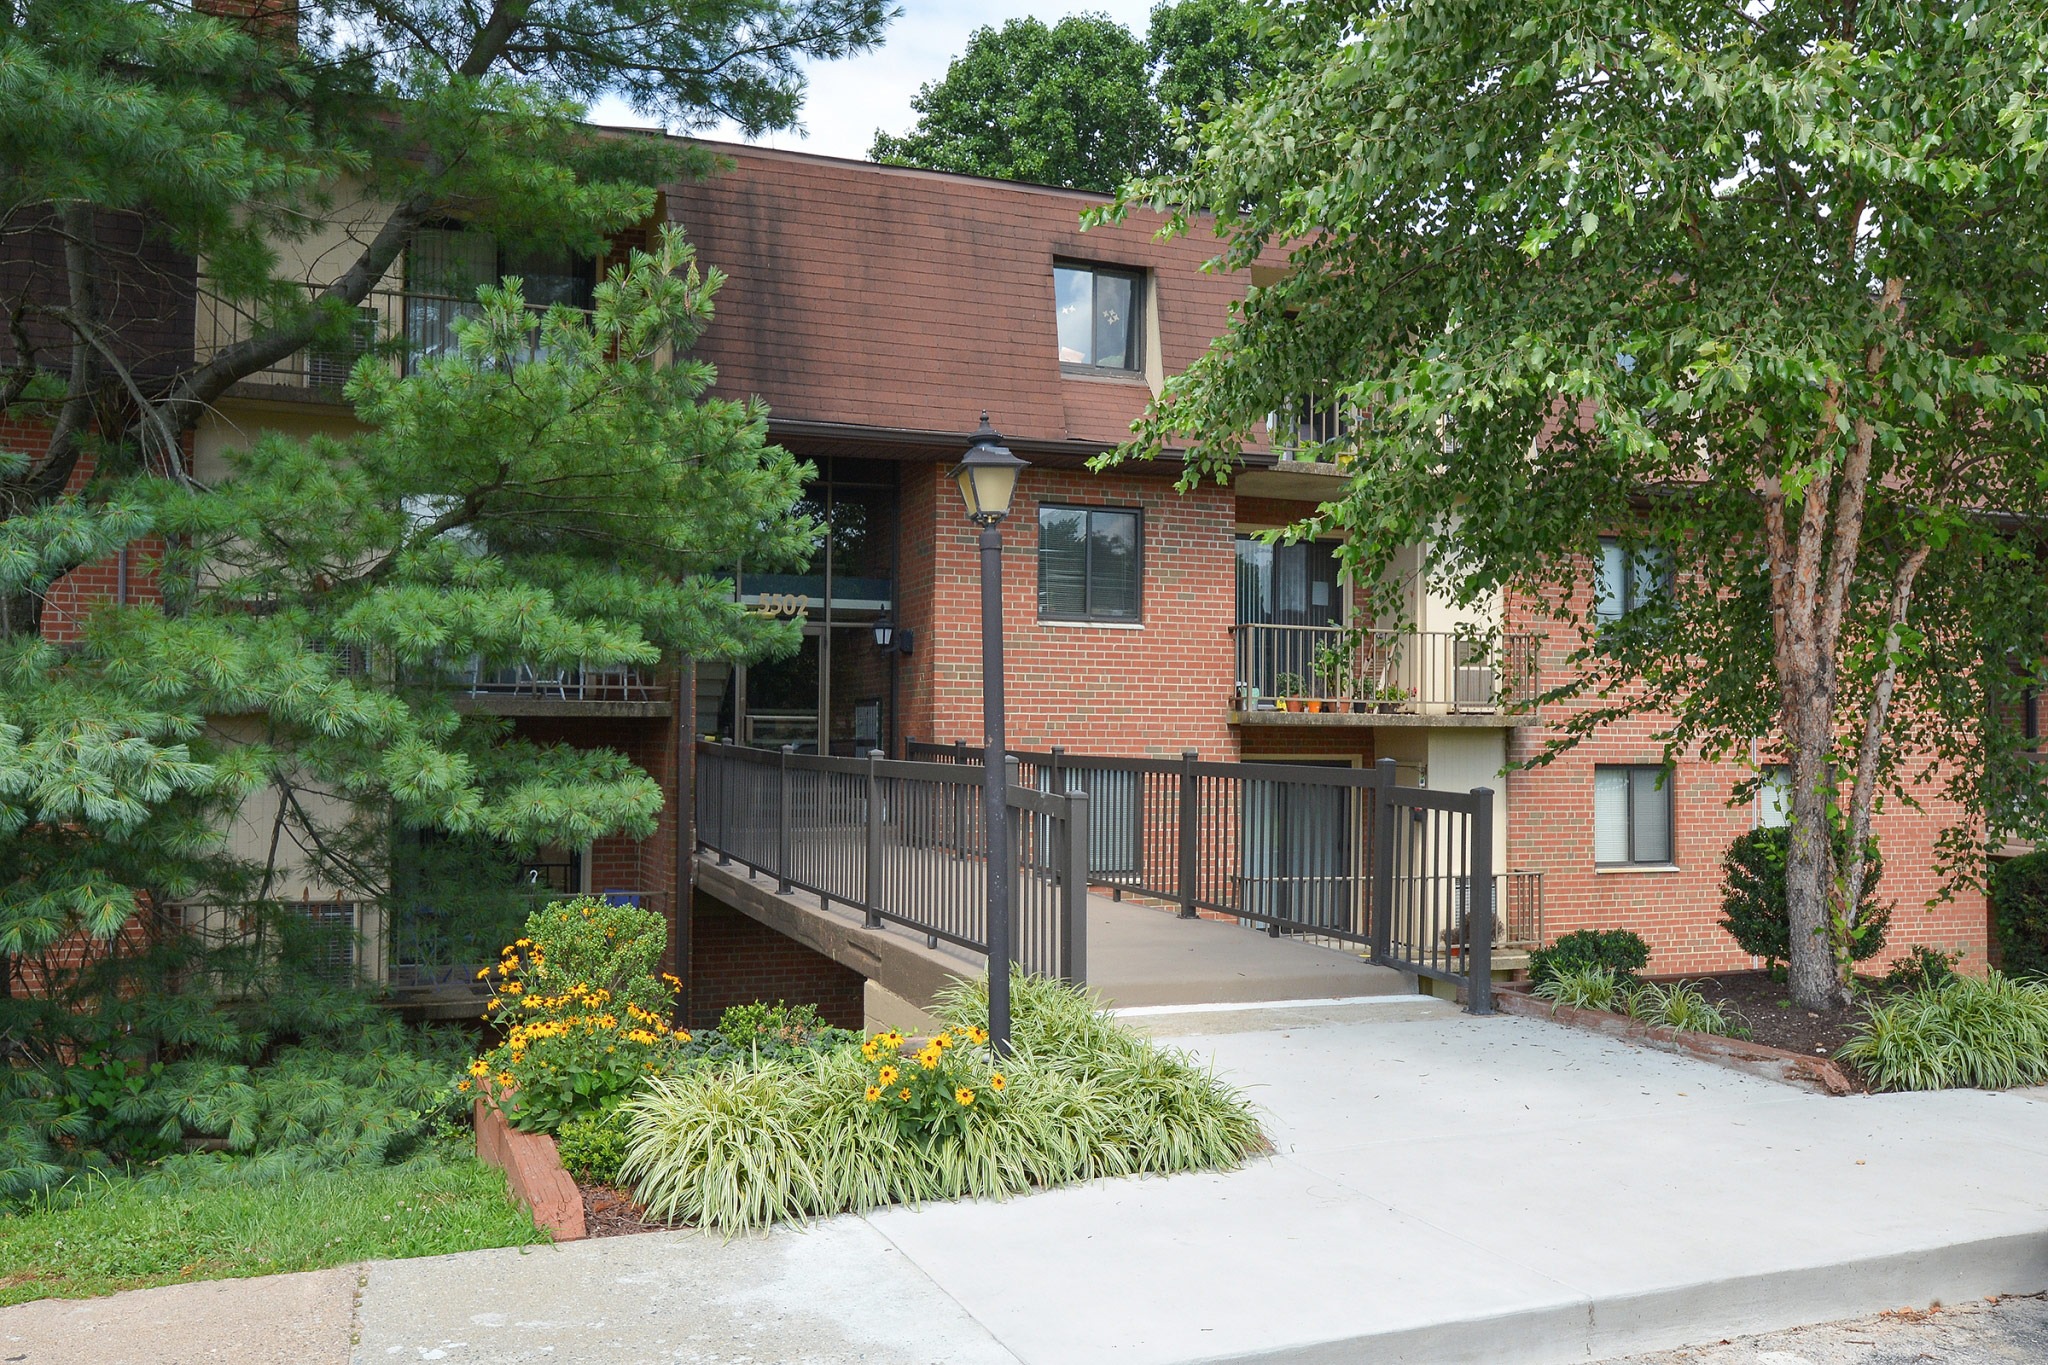 Exterior of an apartment building at Fairway Park, fitted with concrete flooring, railing, and lighting